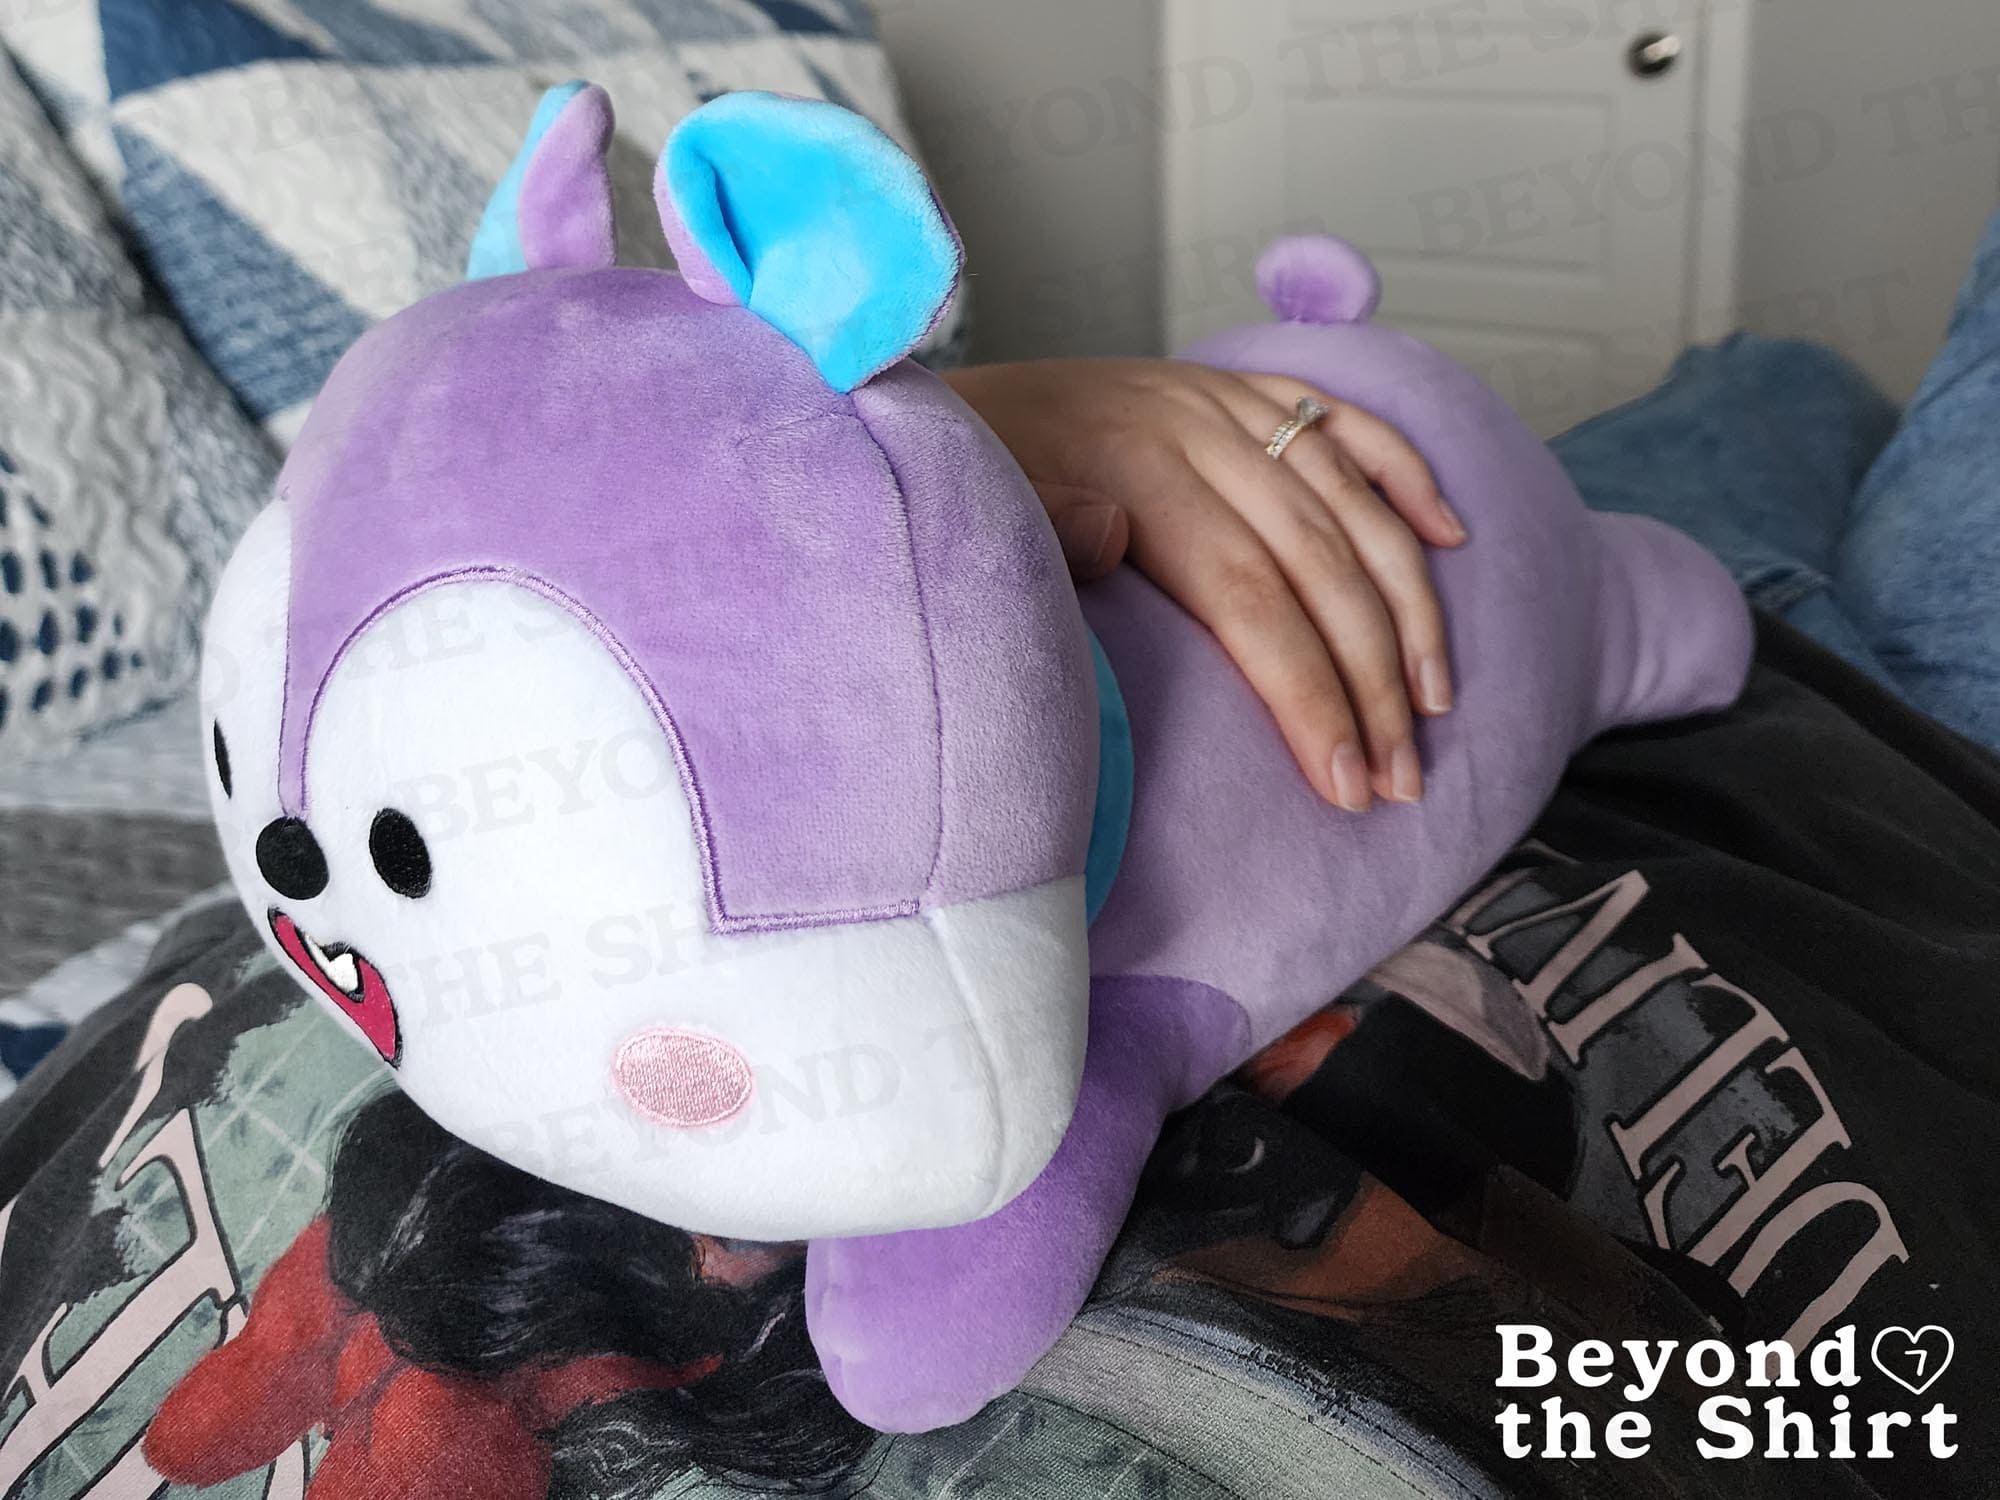 BT21 Weighted Plushie PRE-ORDER (read description for details)